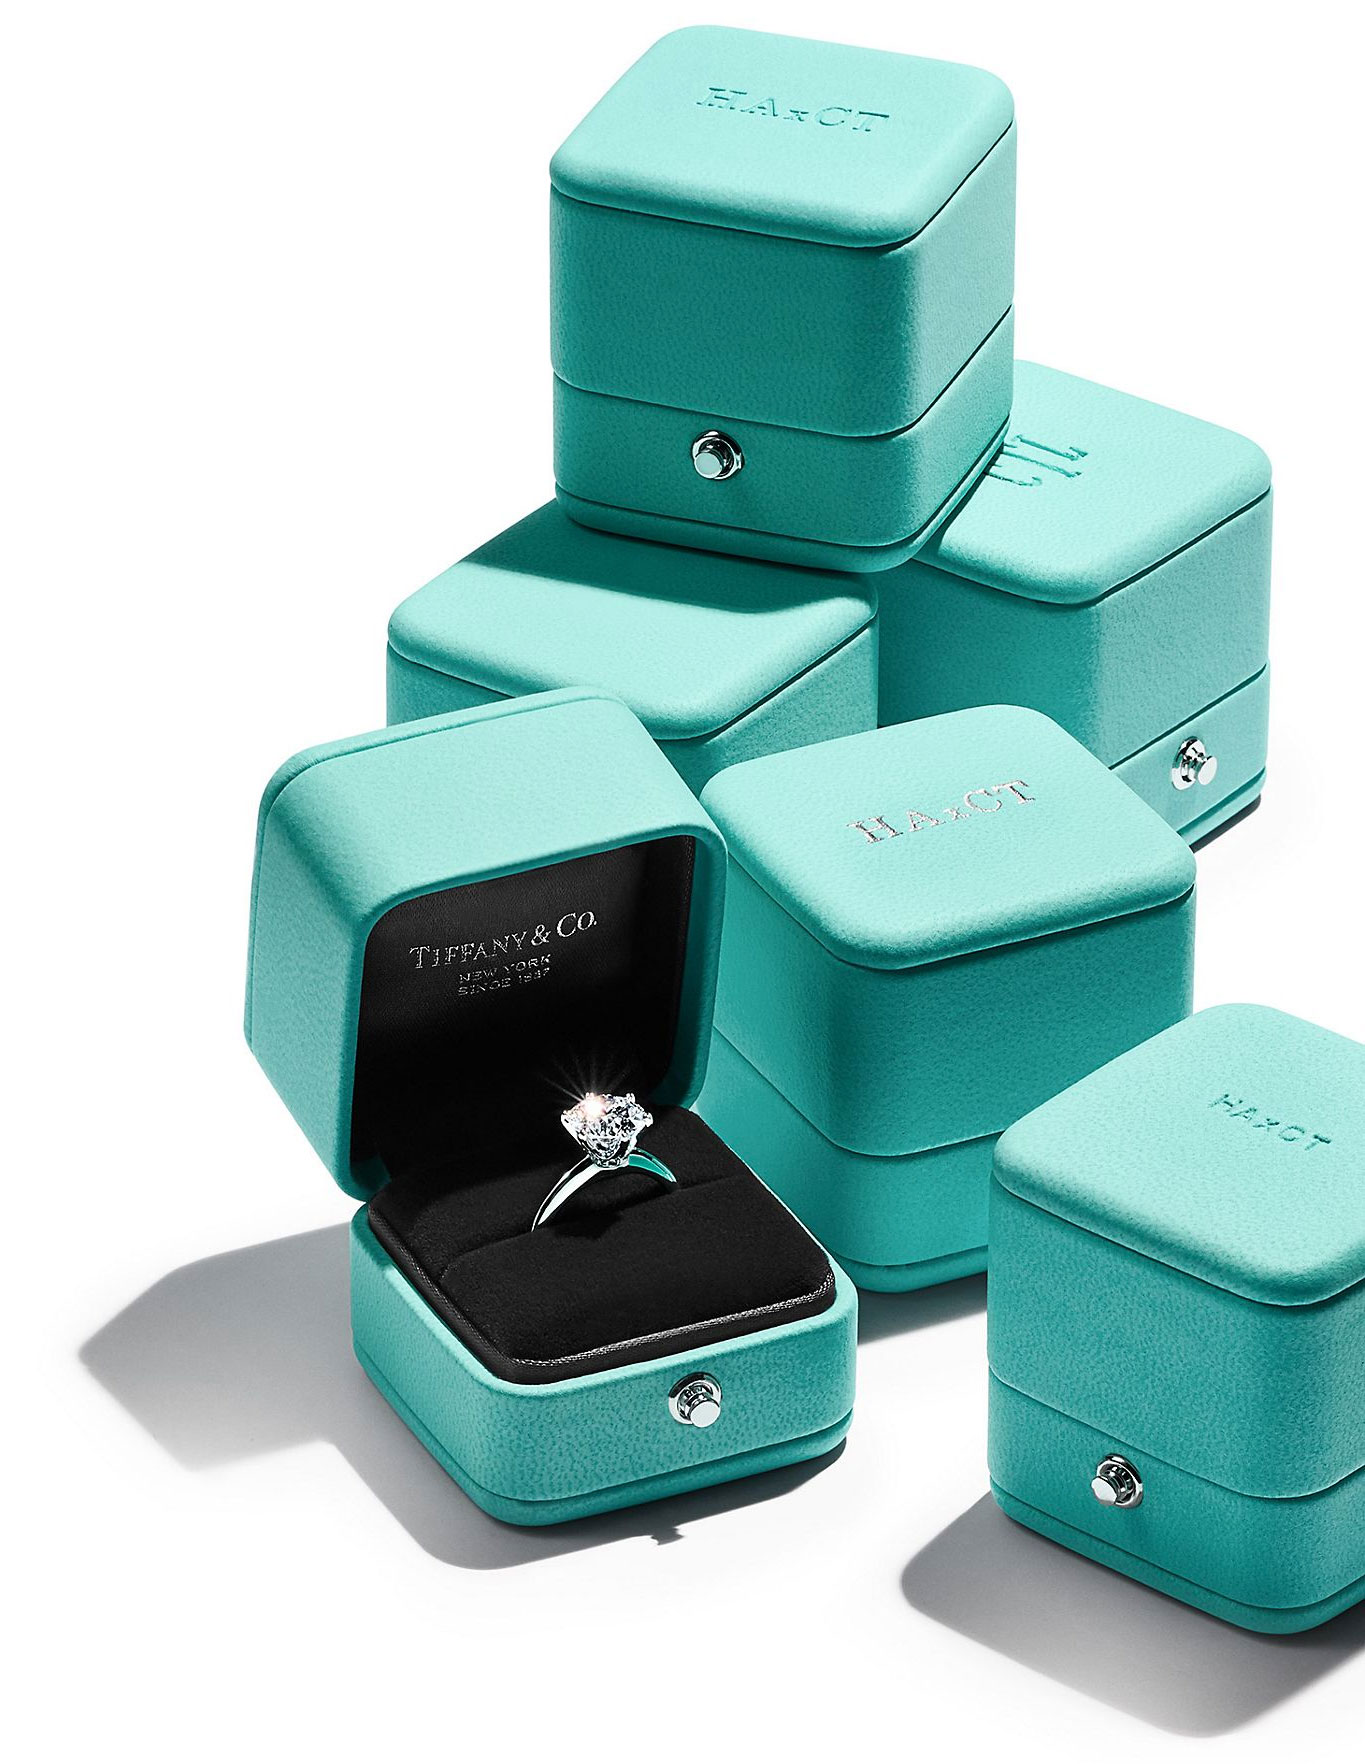 What color is tiffany & co blue that has been remembered for 2 centuries